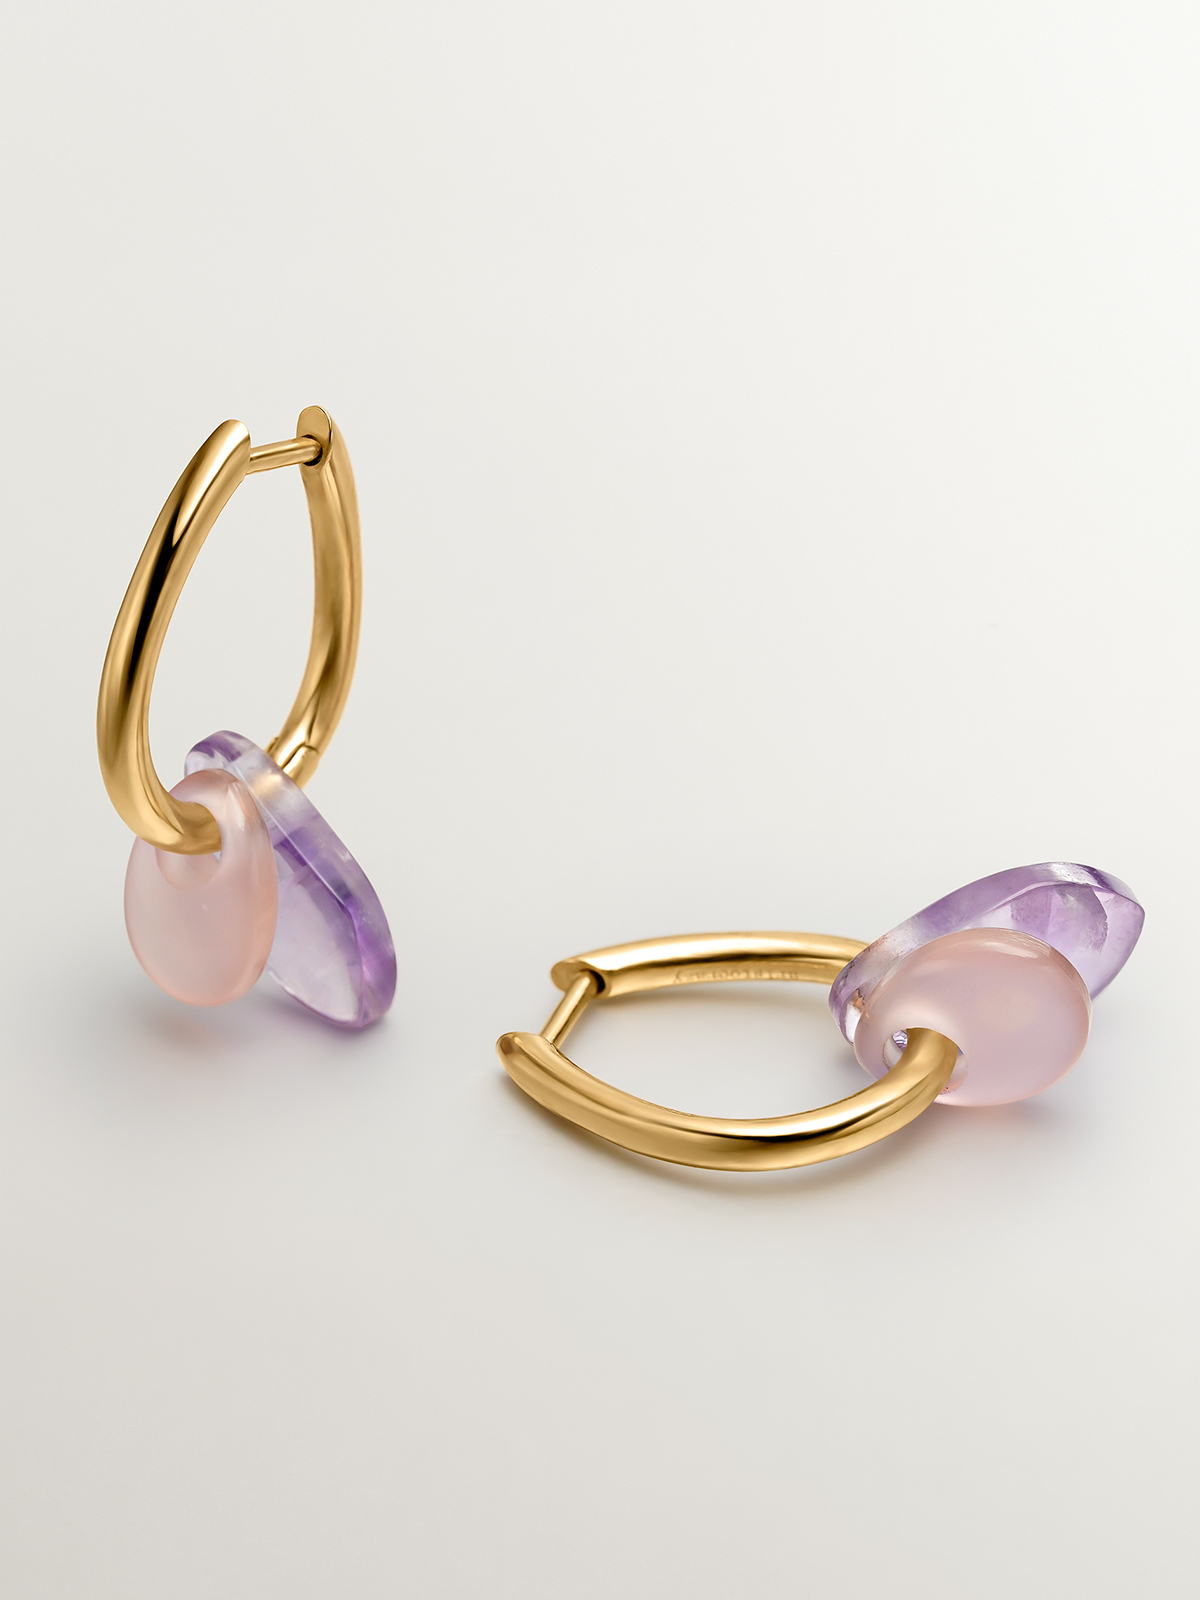 925 silver ring earrings in 18k yellow gold with Ágata